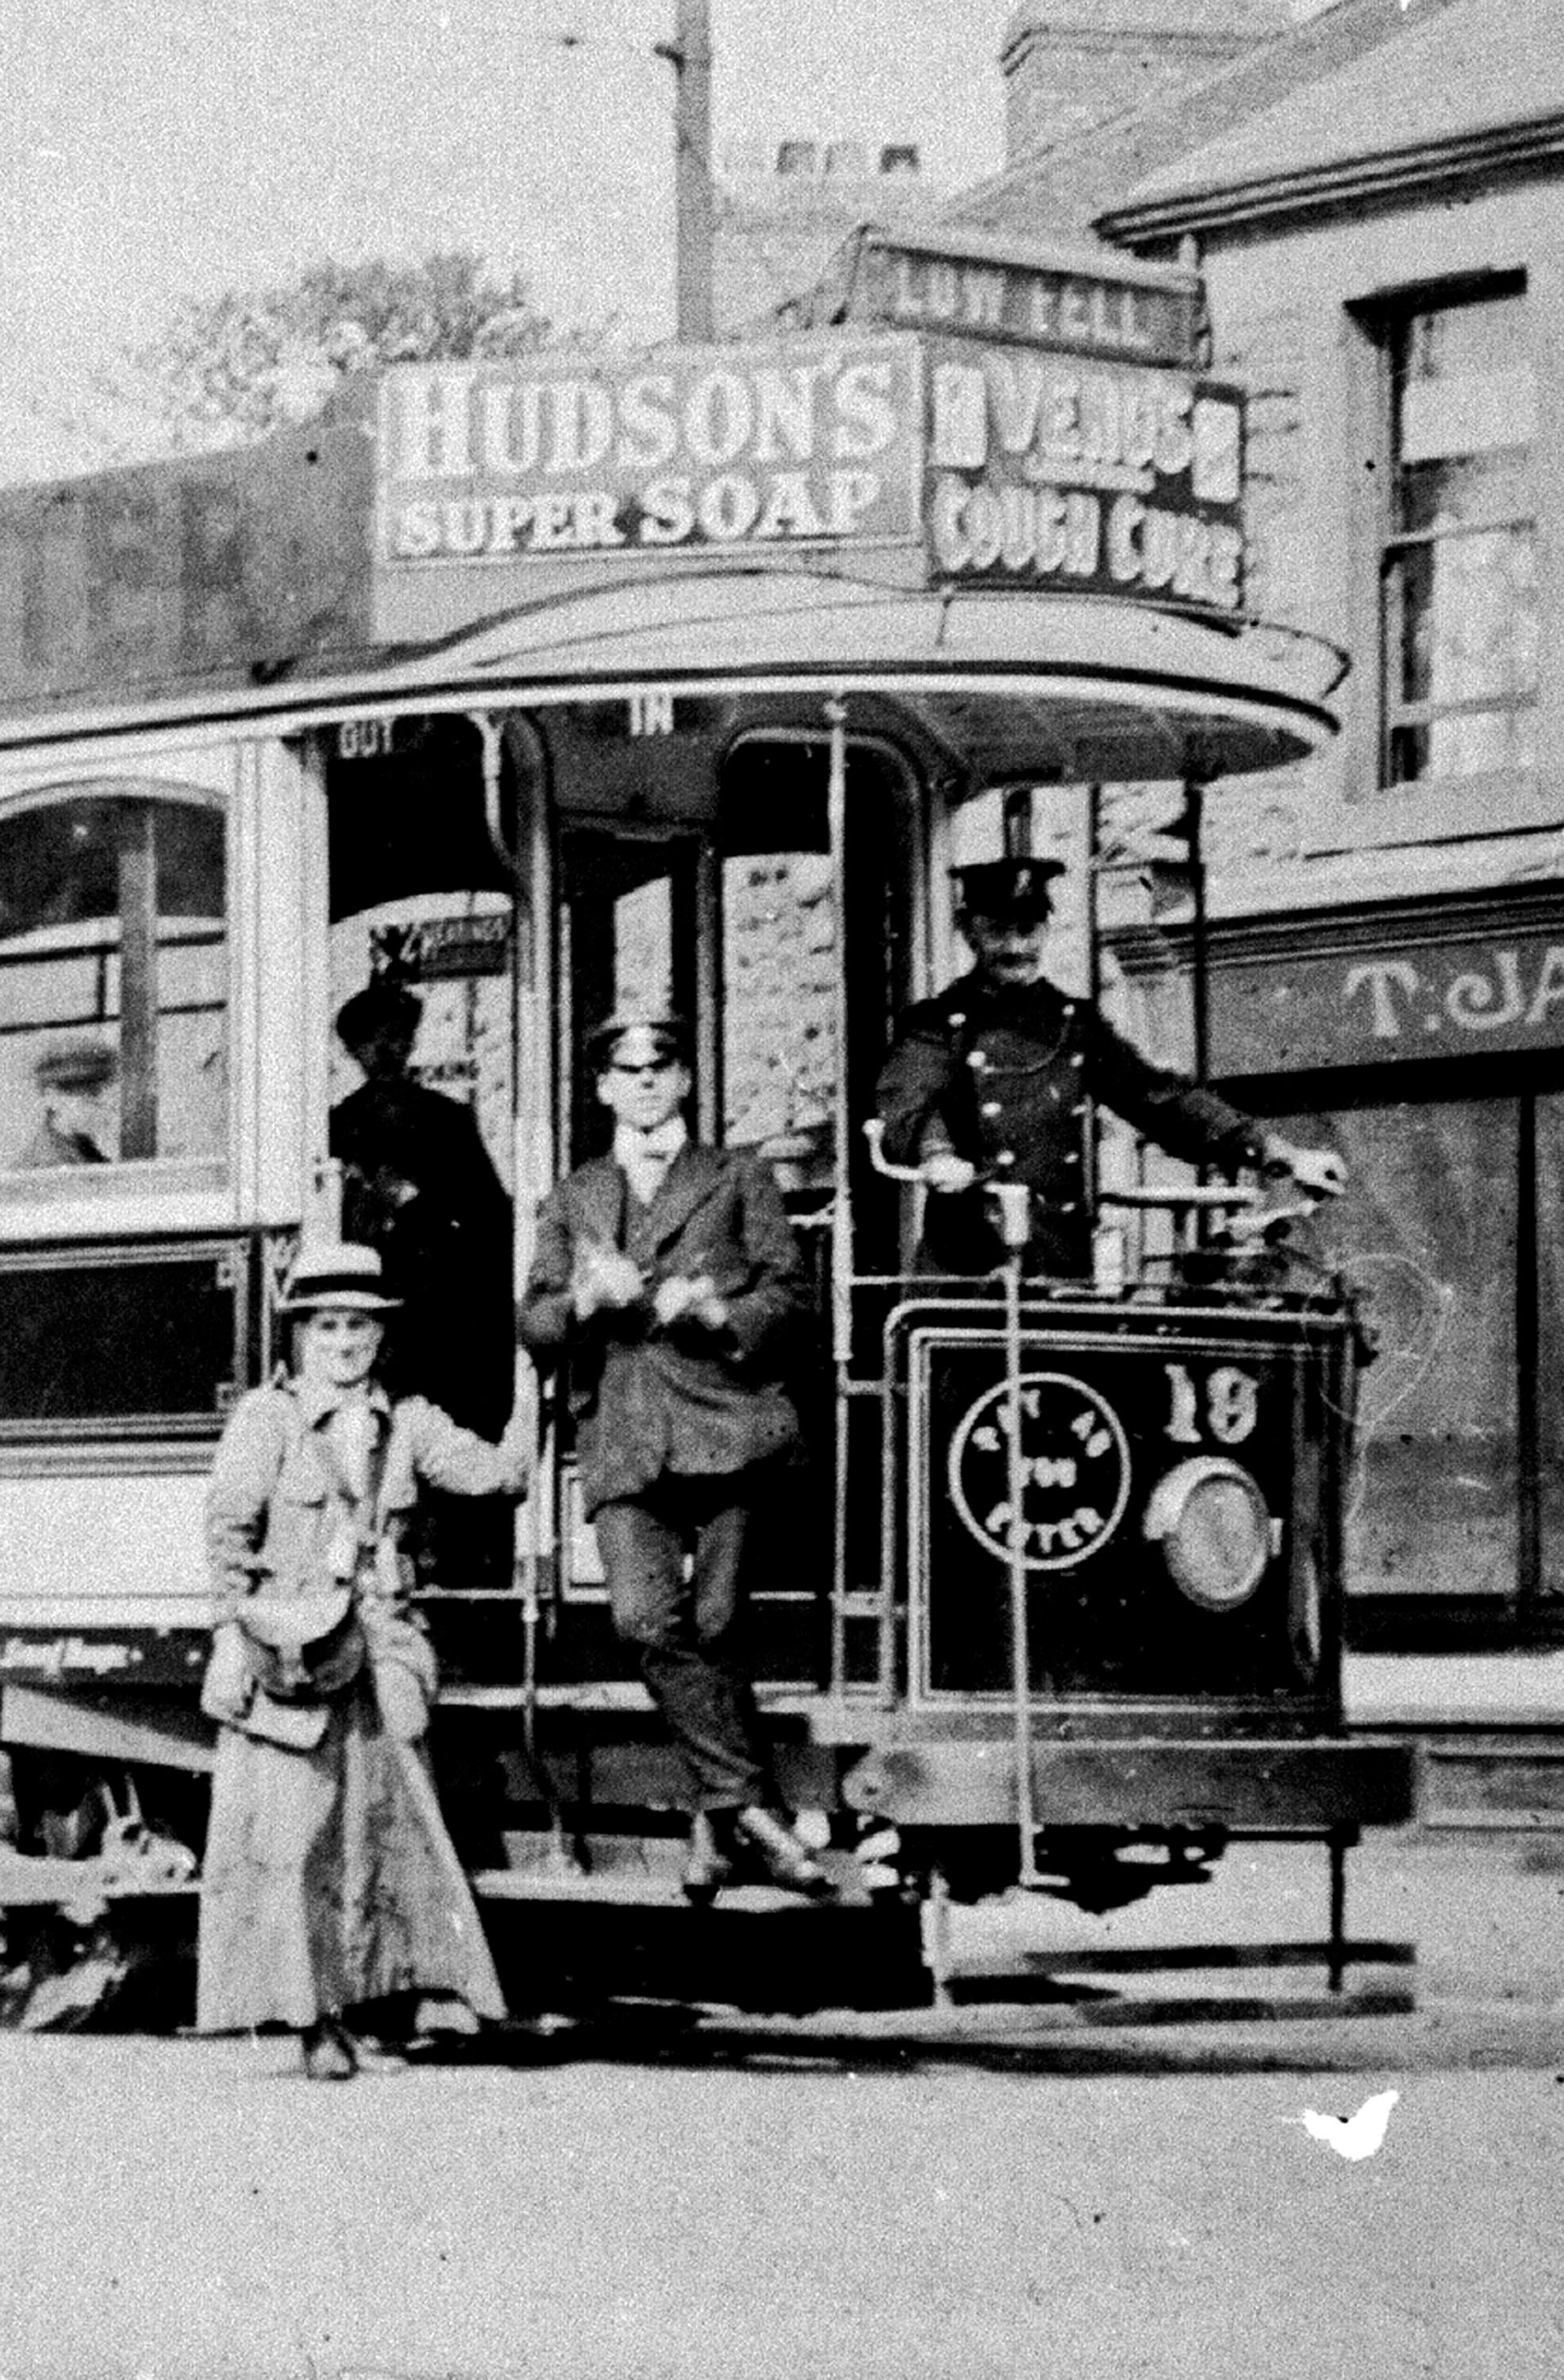 Rose Vanner, Gateshead's first lady tram conductress in 1916